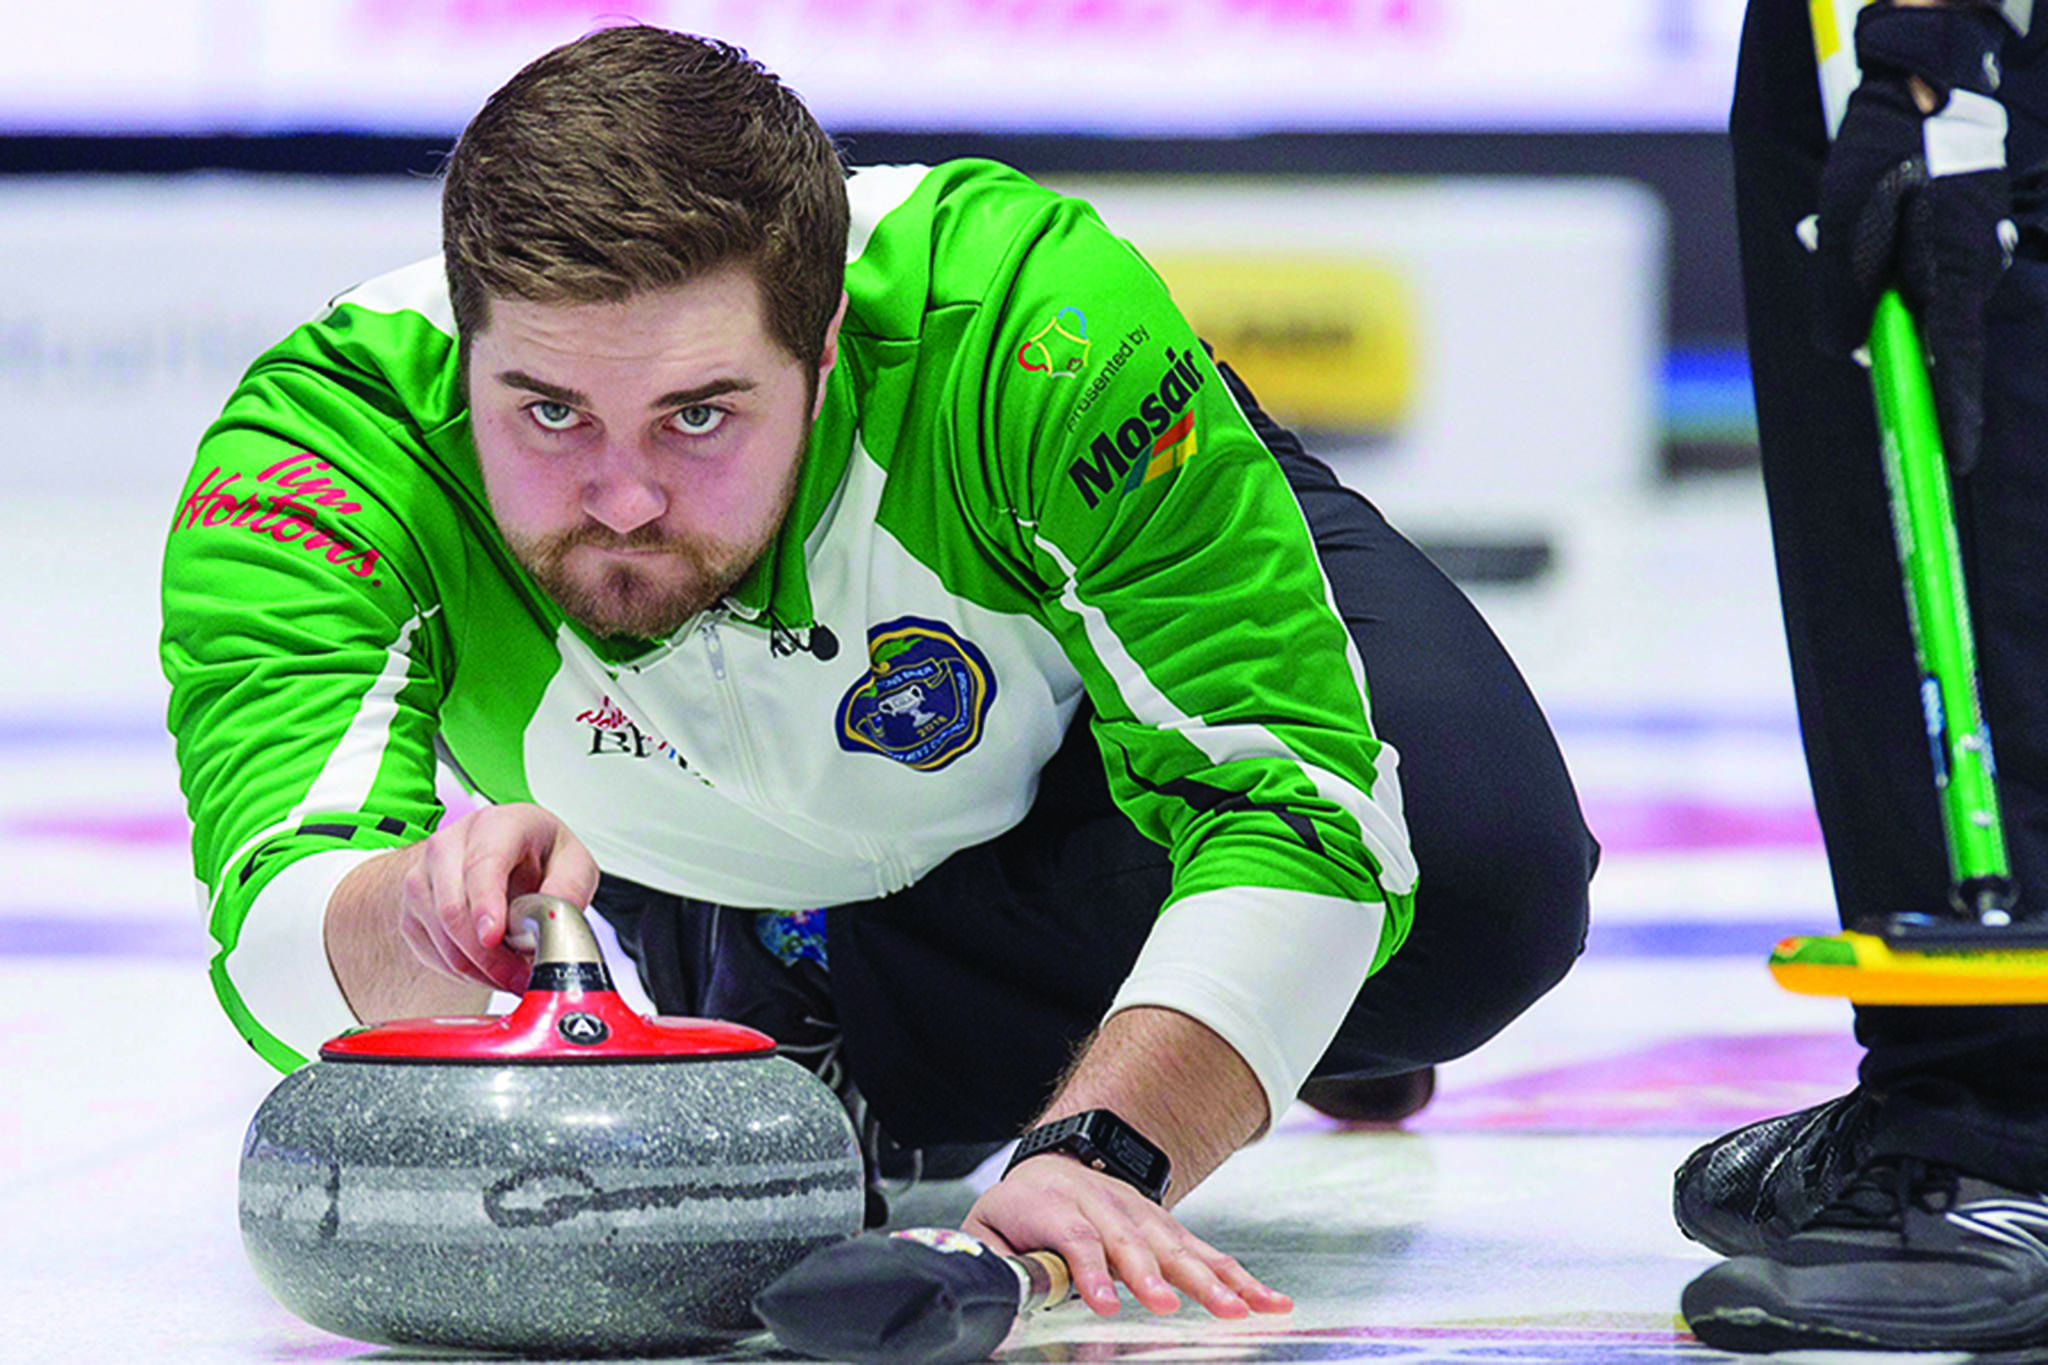 Saskatchewan third Matt Dunstone, who throws fourth rocks, releases a shot as they play Manitoba at the Tim Hortons Brier curling championship at the Brandt Centre in Regina on Sunday, March 4, 2018. THE CANADIAN PRESS/Andrew Vaughan